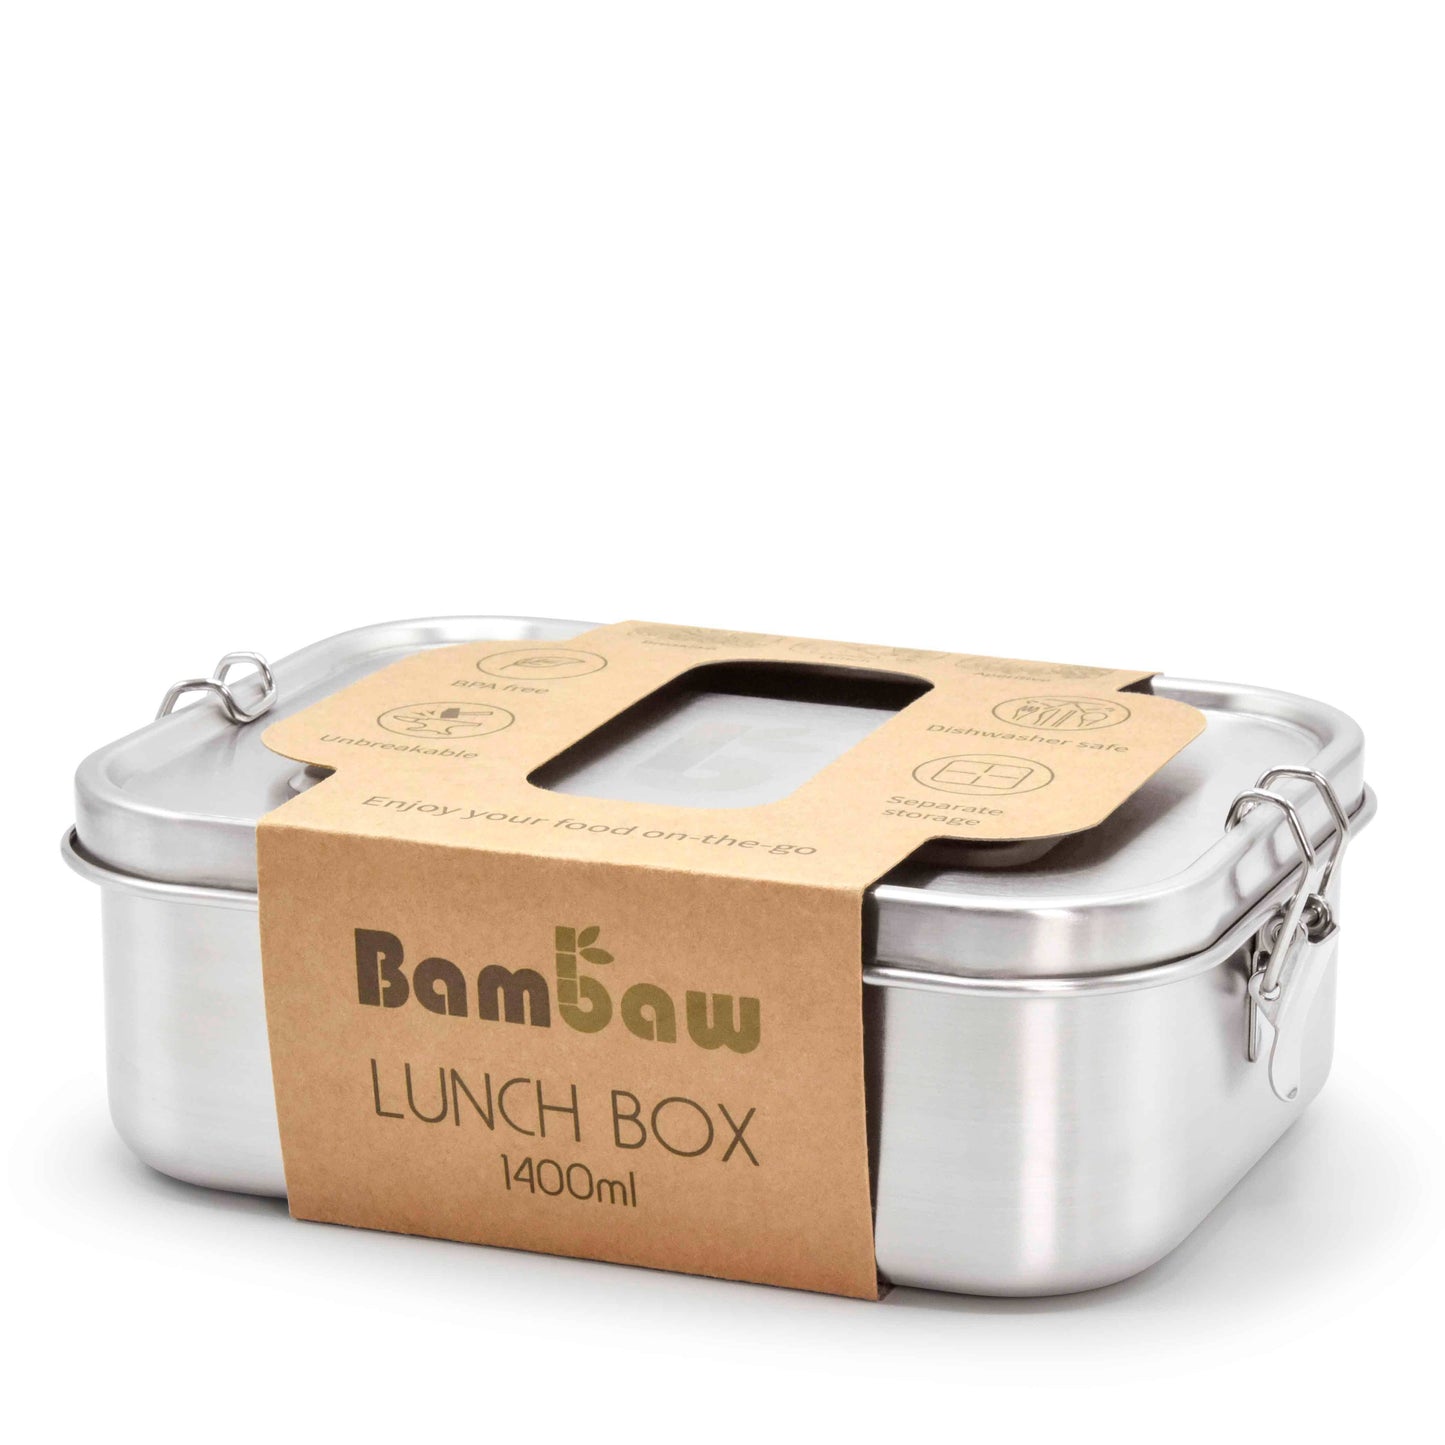 1400ml Stainless Steel Lunch Box